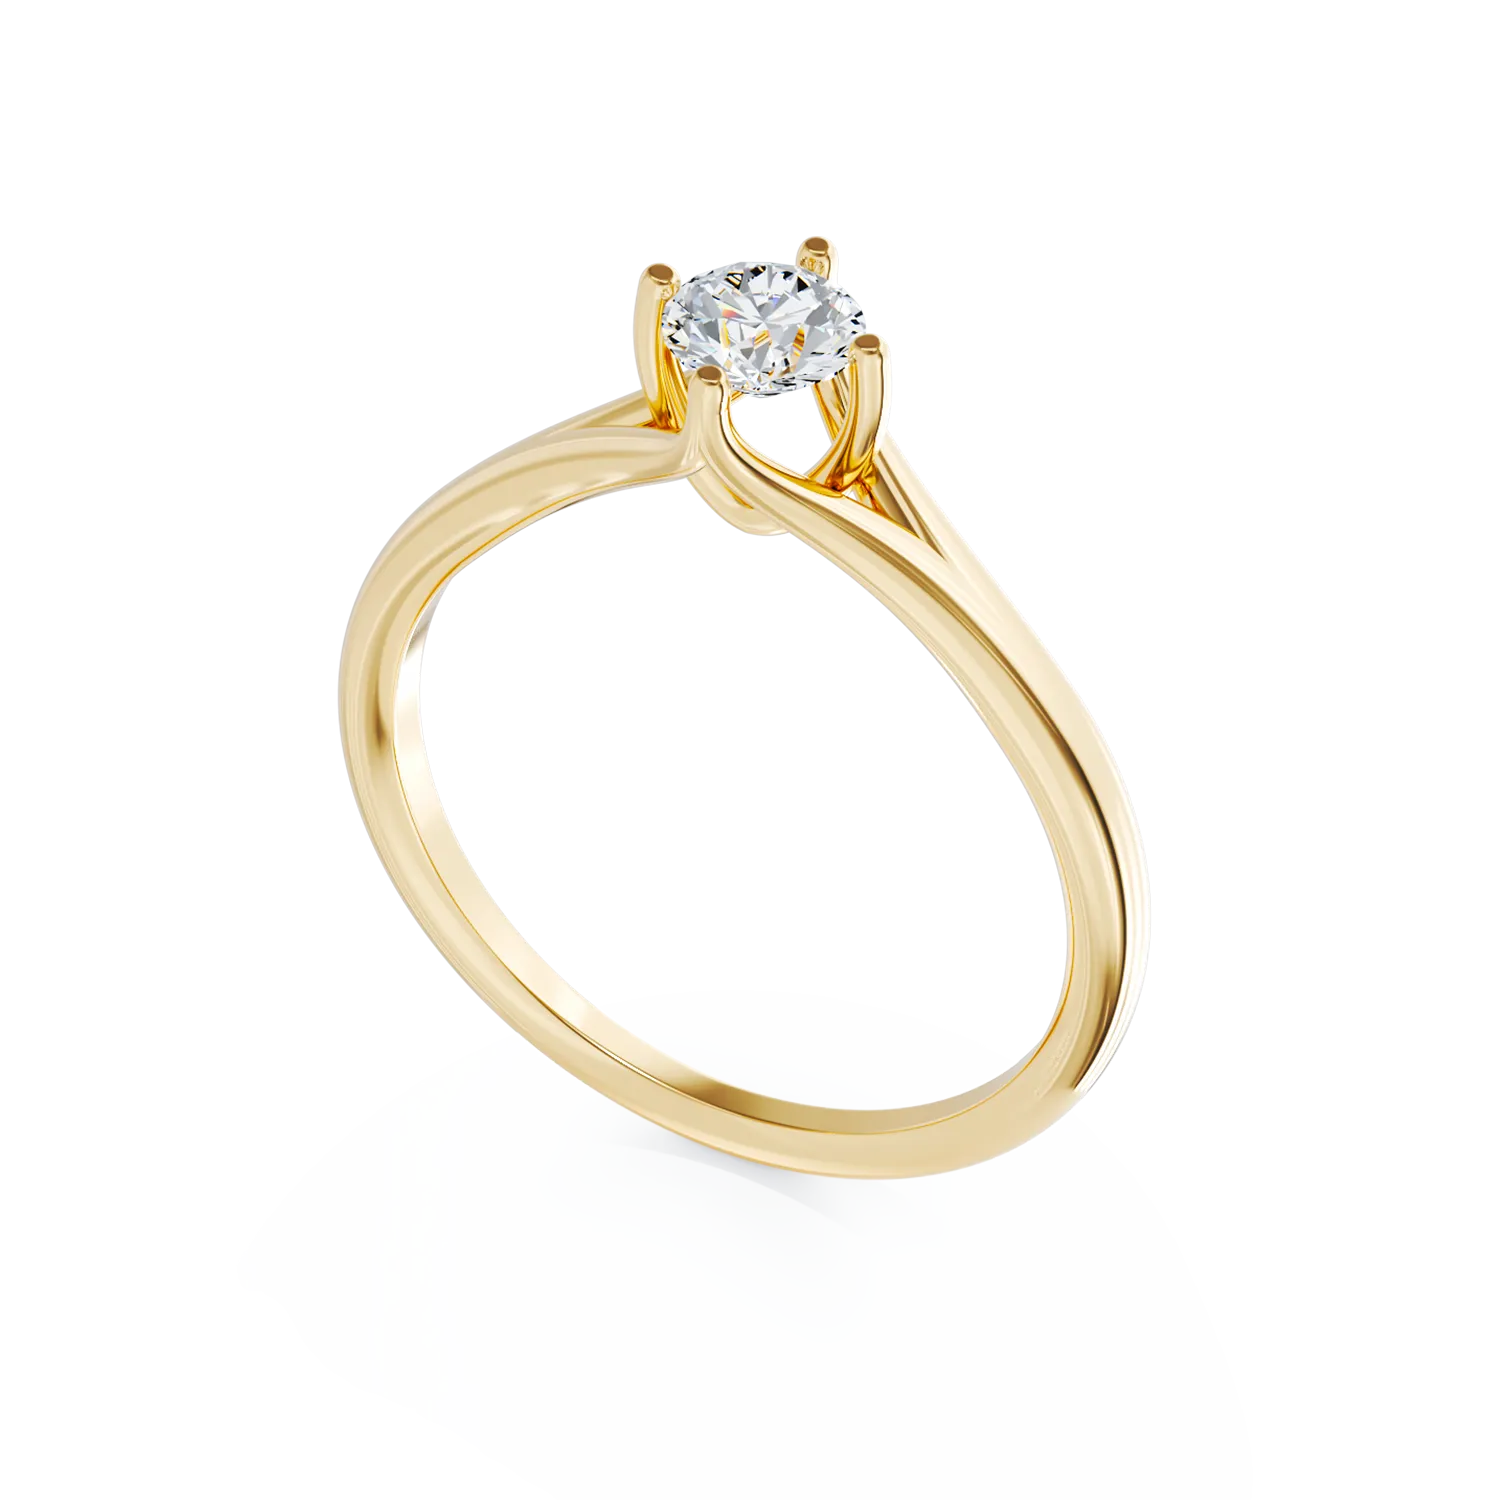 18K yellow gold engagement ring with 0.2ct diamond